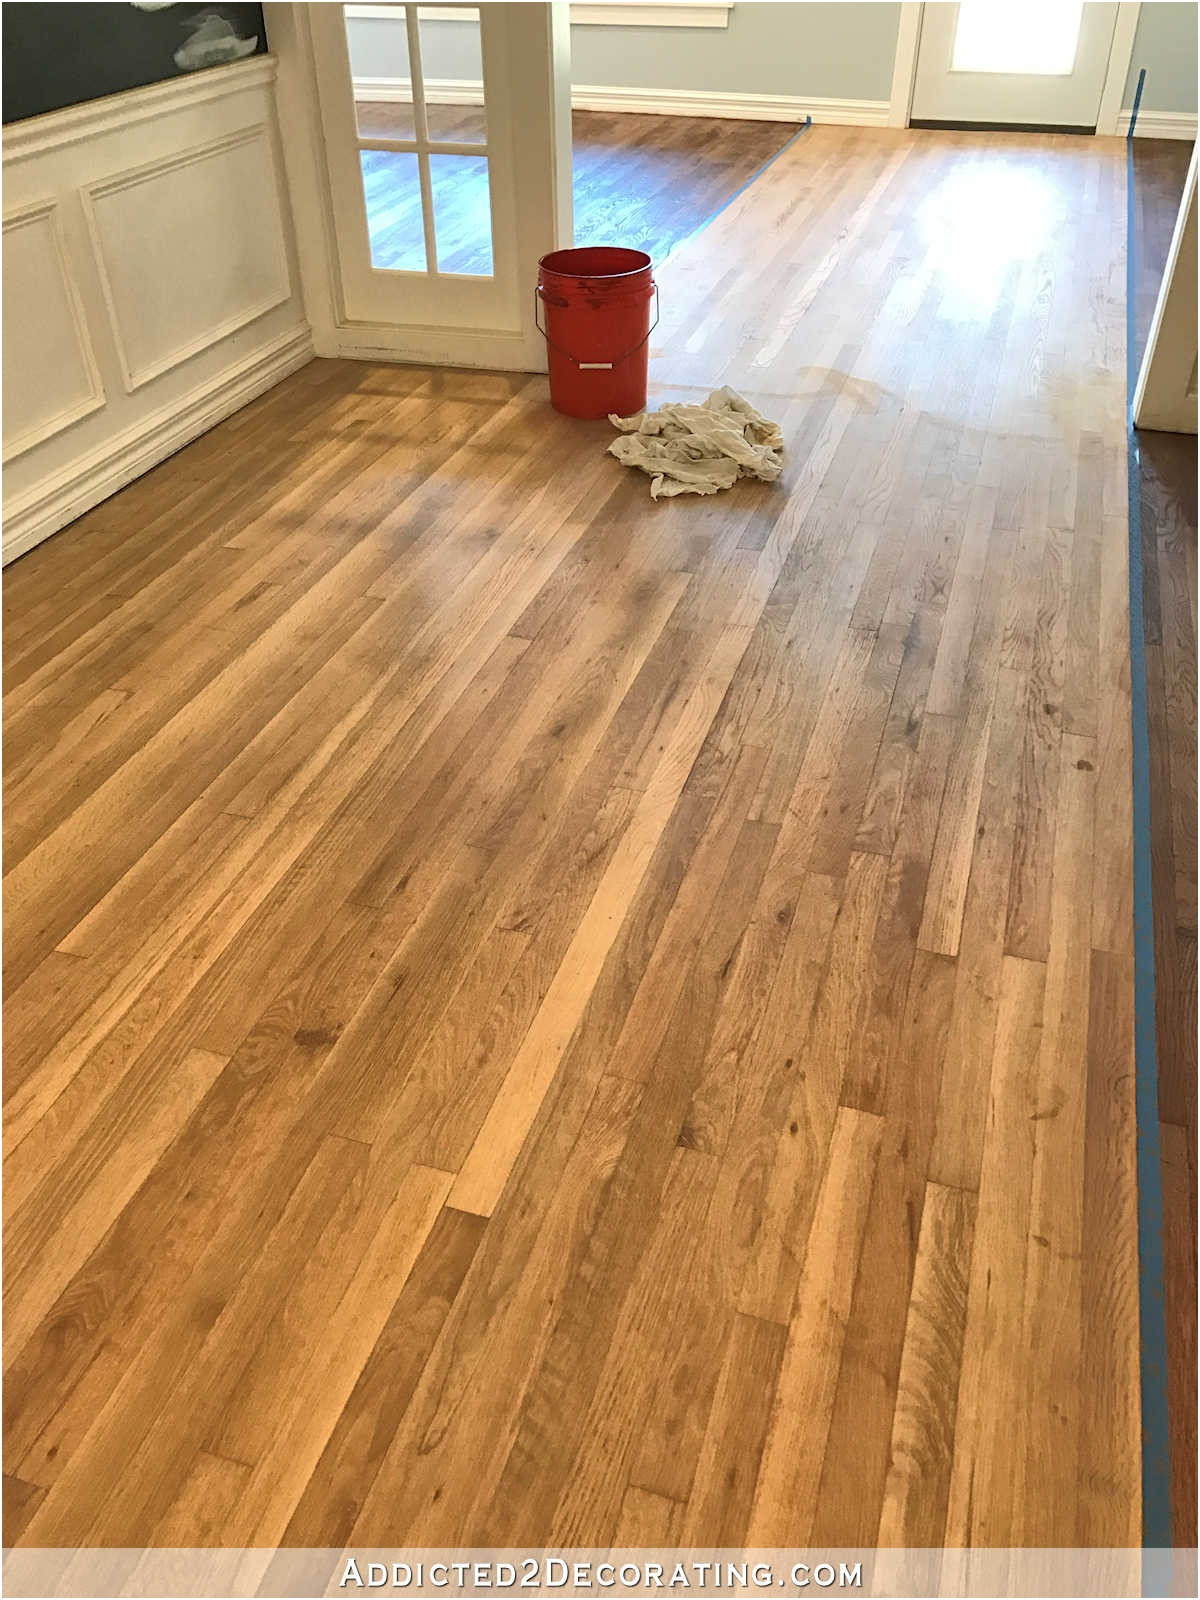 hardwood floor colors home depot of home depot red oak hardwood flooring collection funky wood stain in home depot red oak hardwood flooring images adventures in staining my red oak hardwood floors products